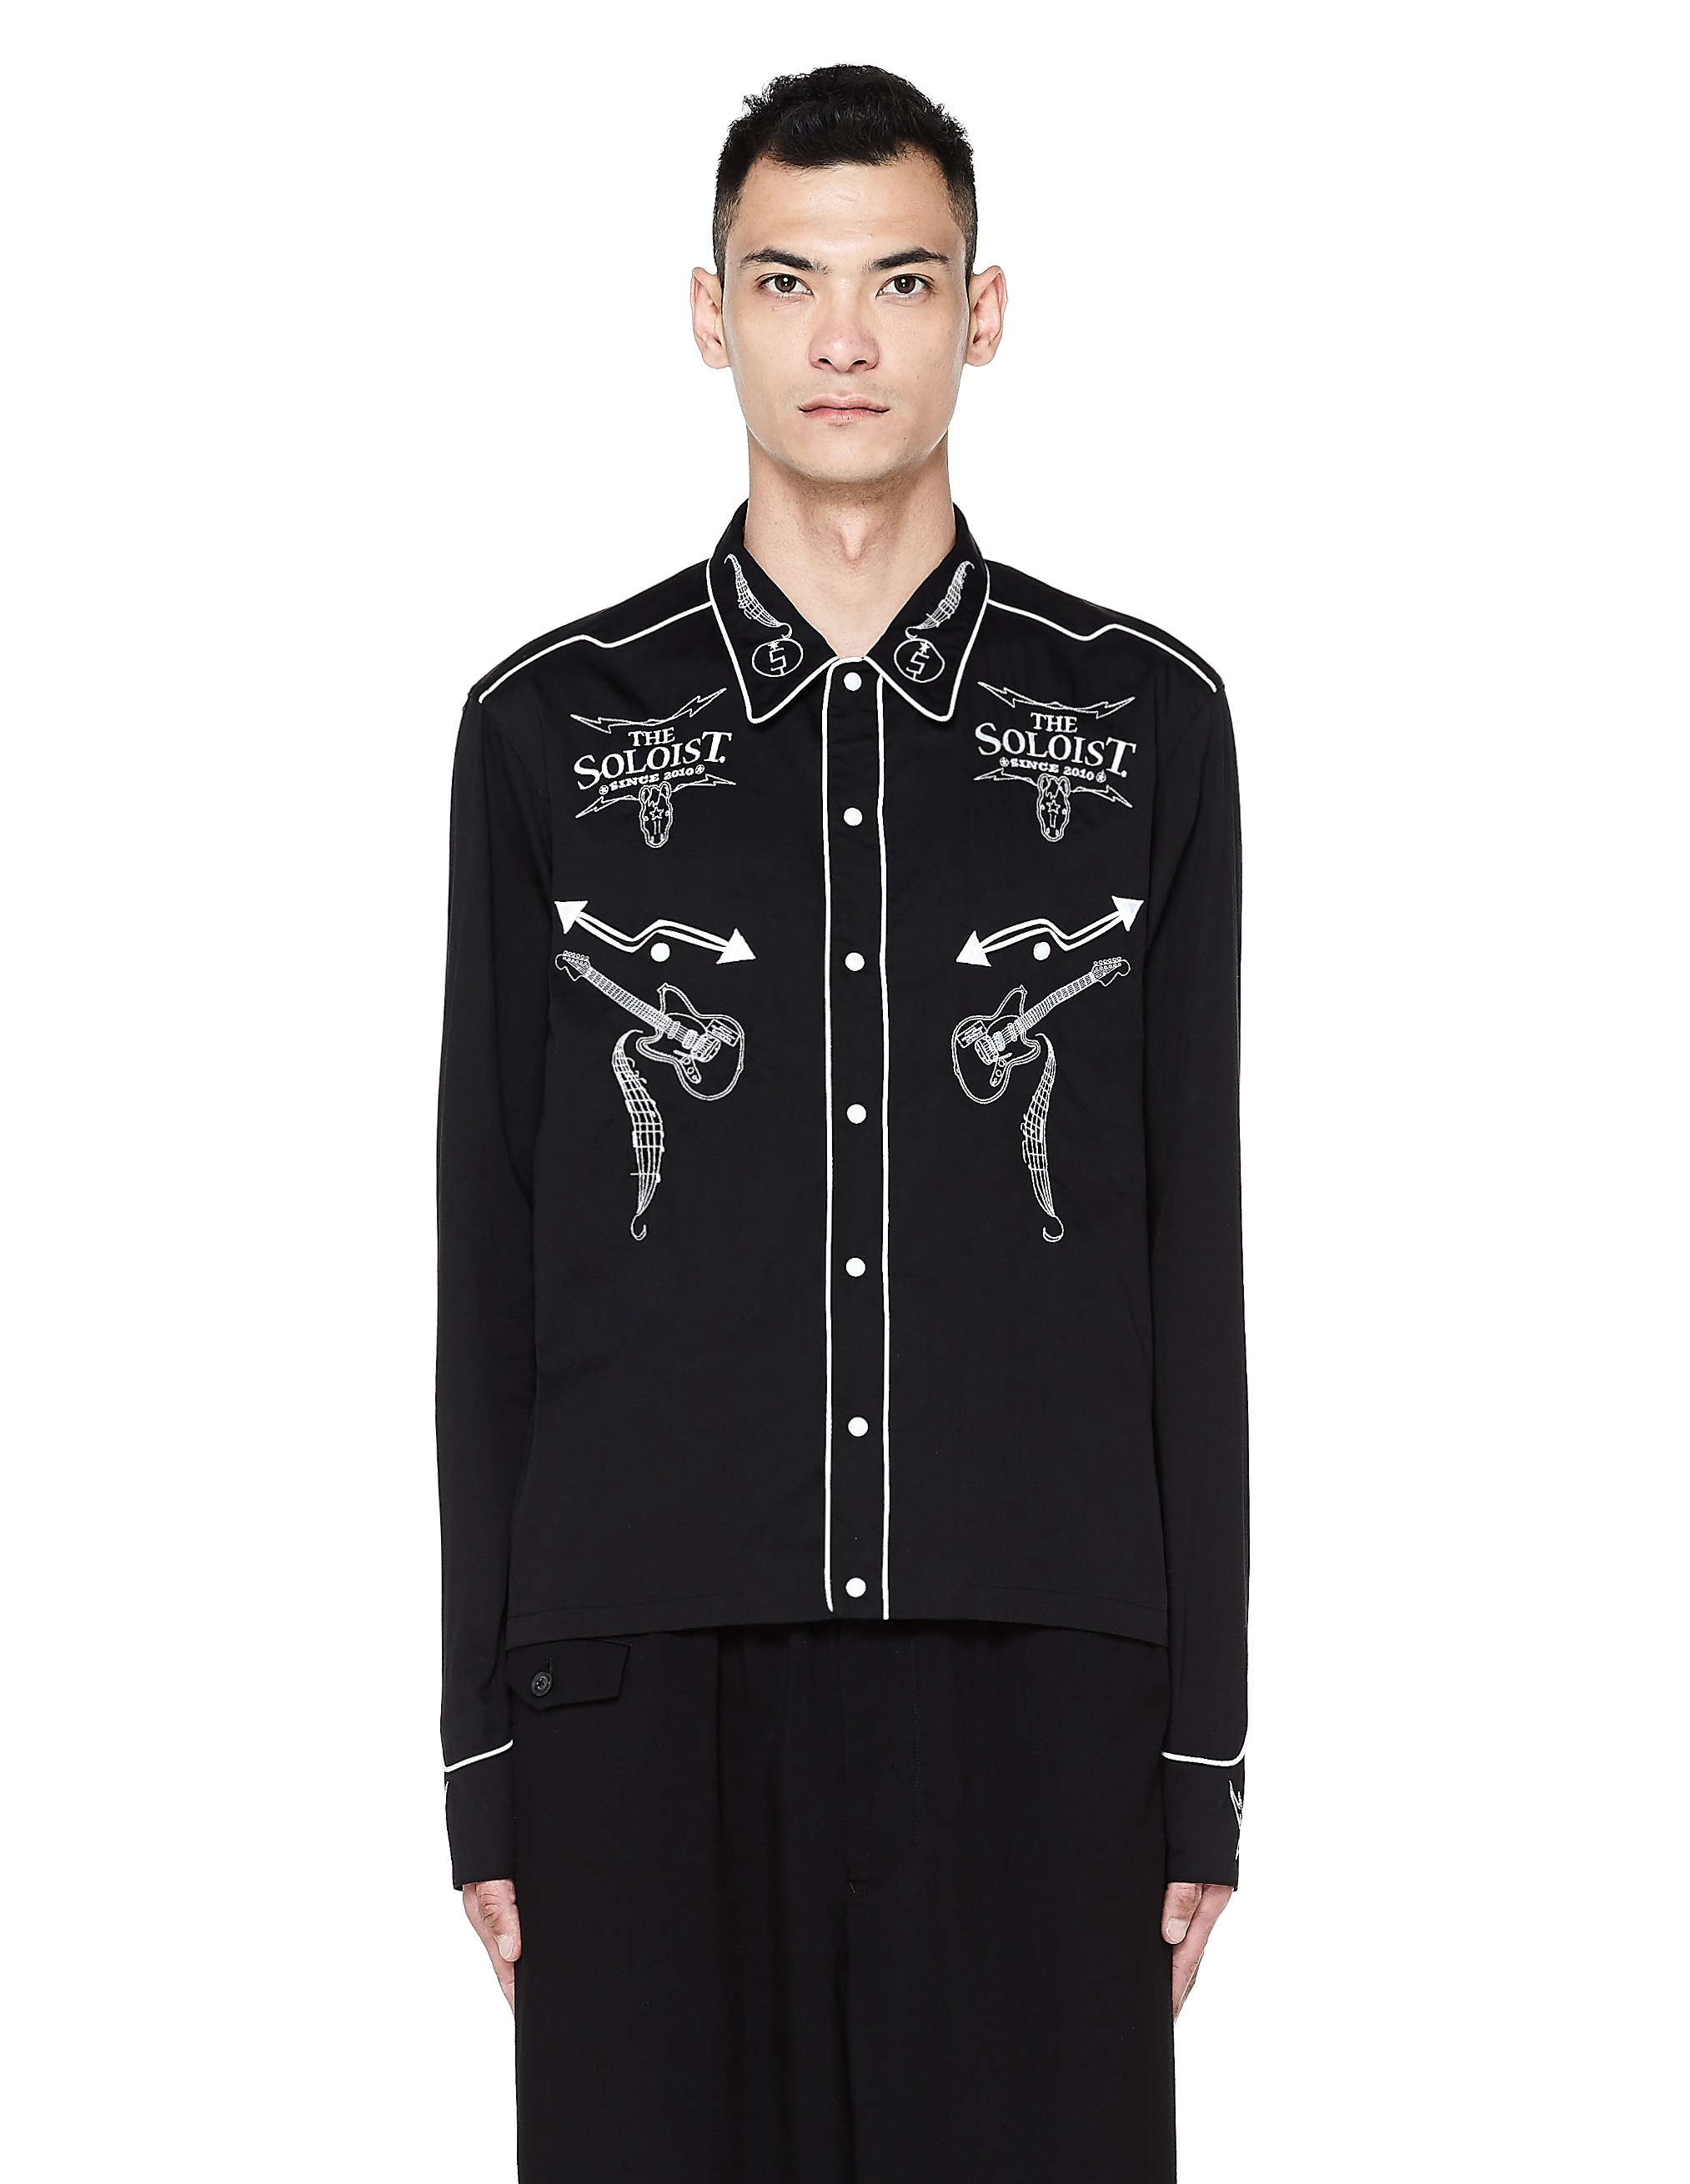 THE SOLOIST LOGO EMBROIDERED SHIRT,ss.0007